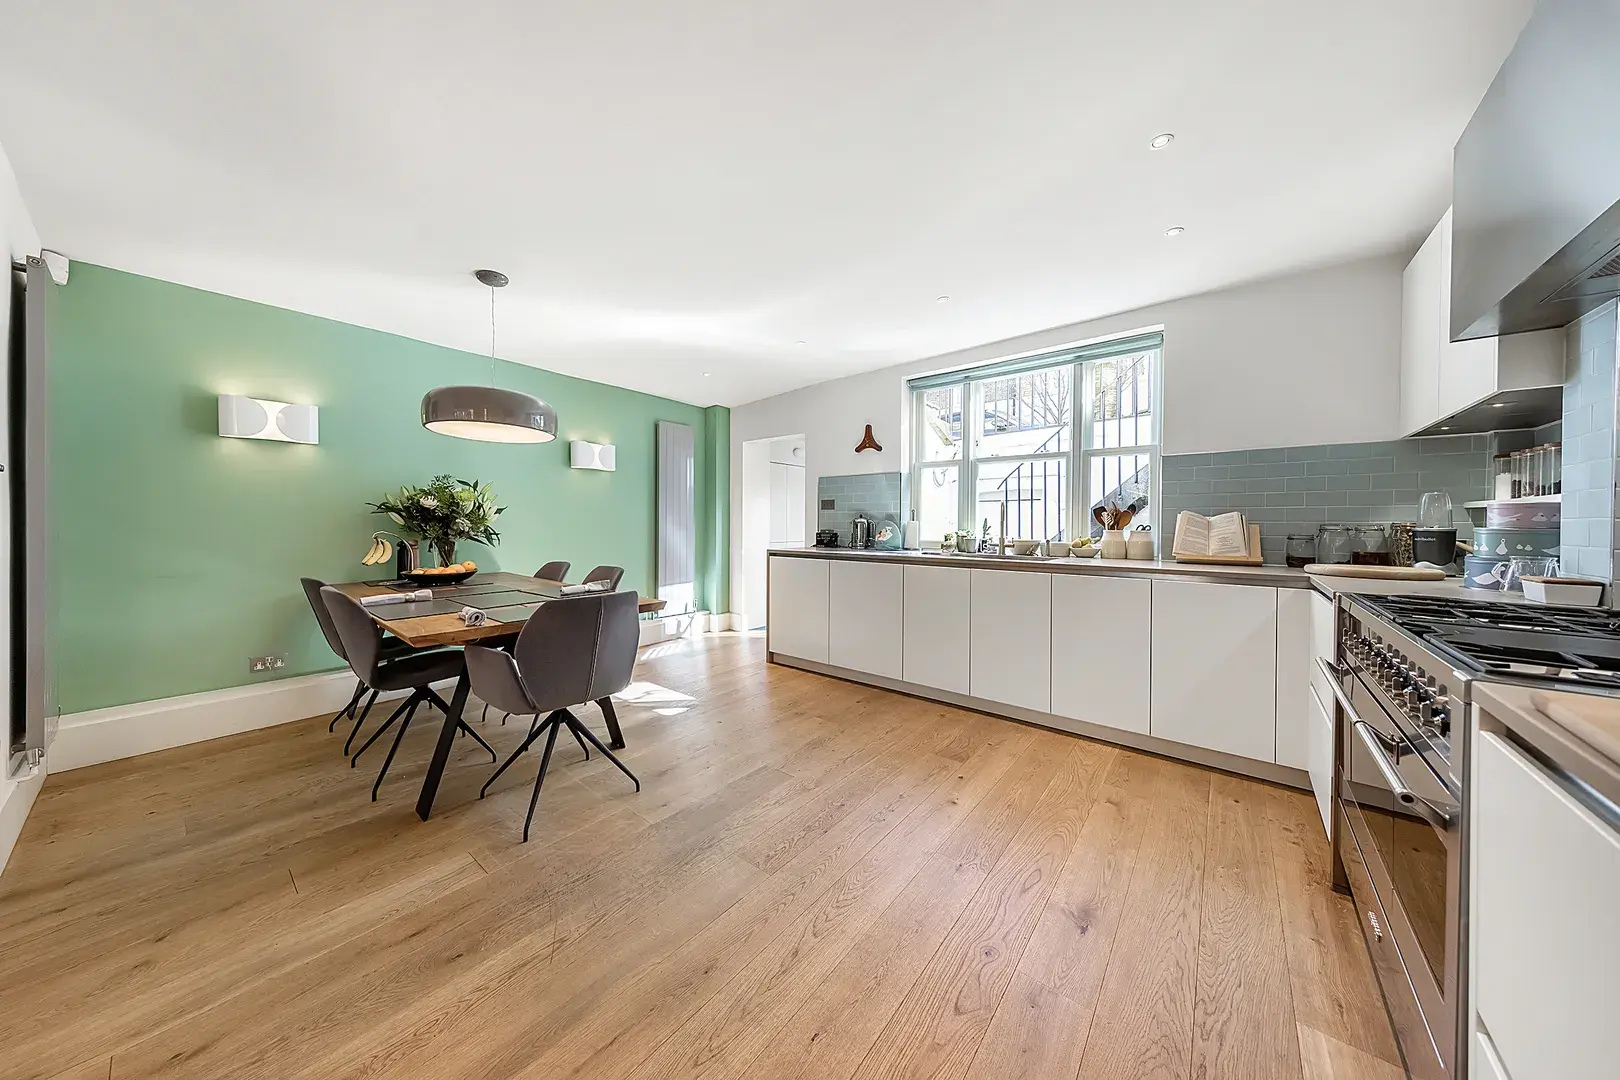 Devonia Road, holiday home in Islington, London